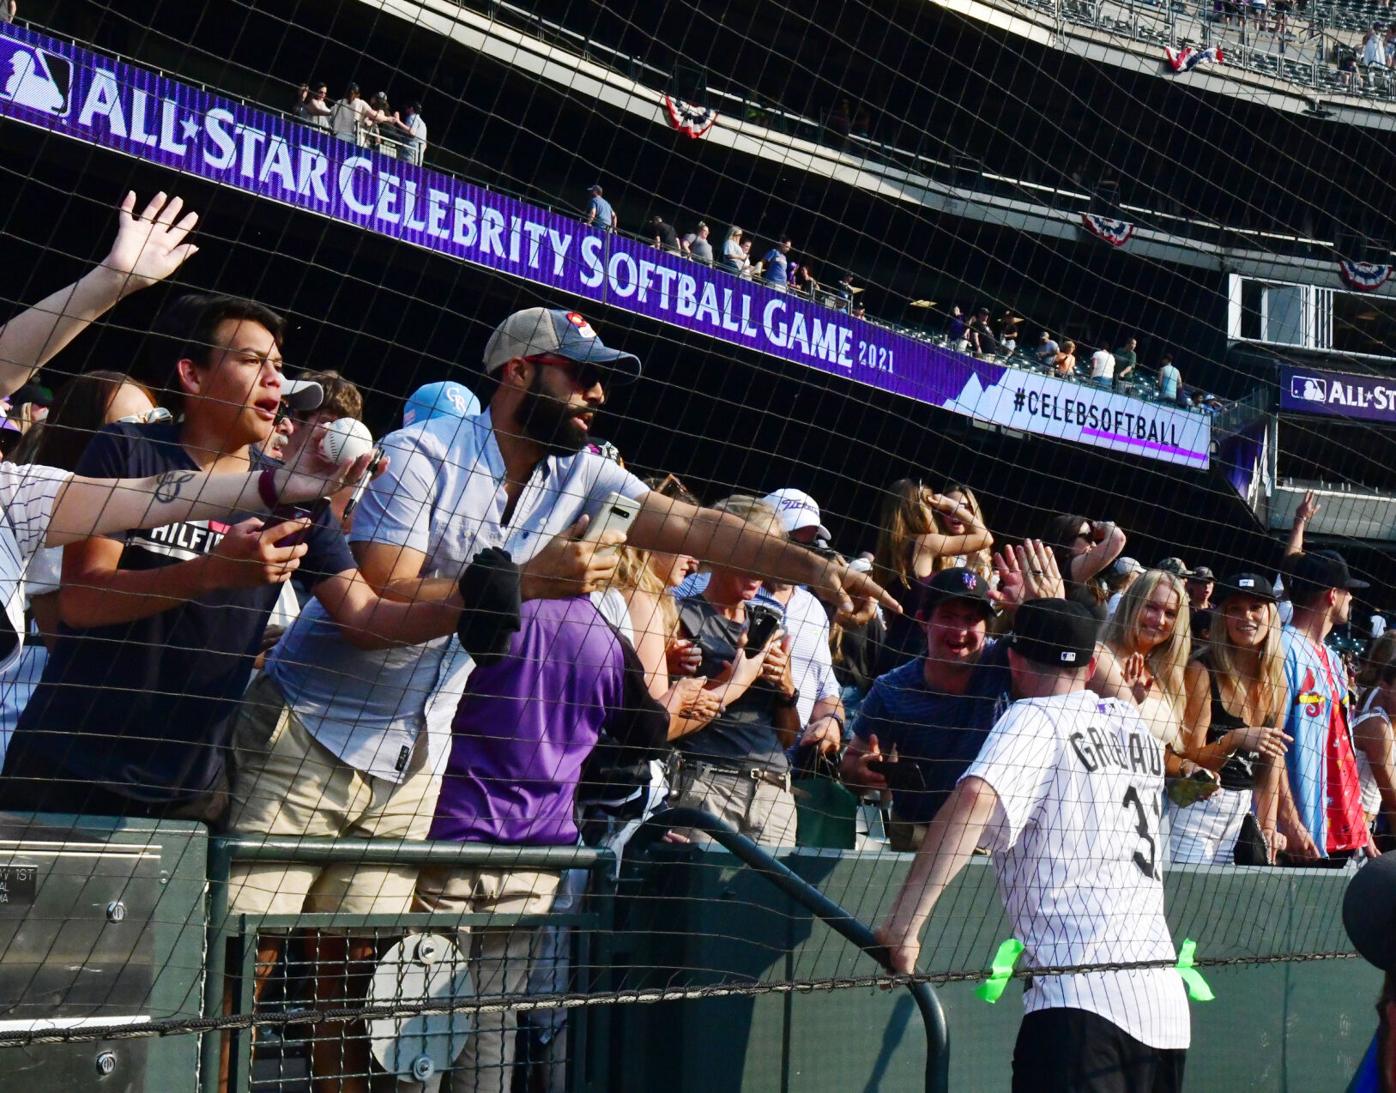 PHOTOS: 2021 MLB All-Star Celebrity Softball Game at Coors Field